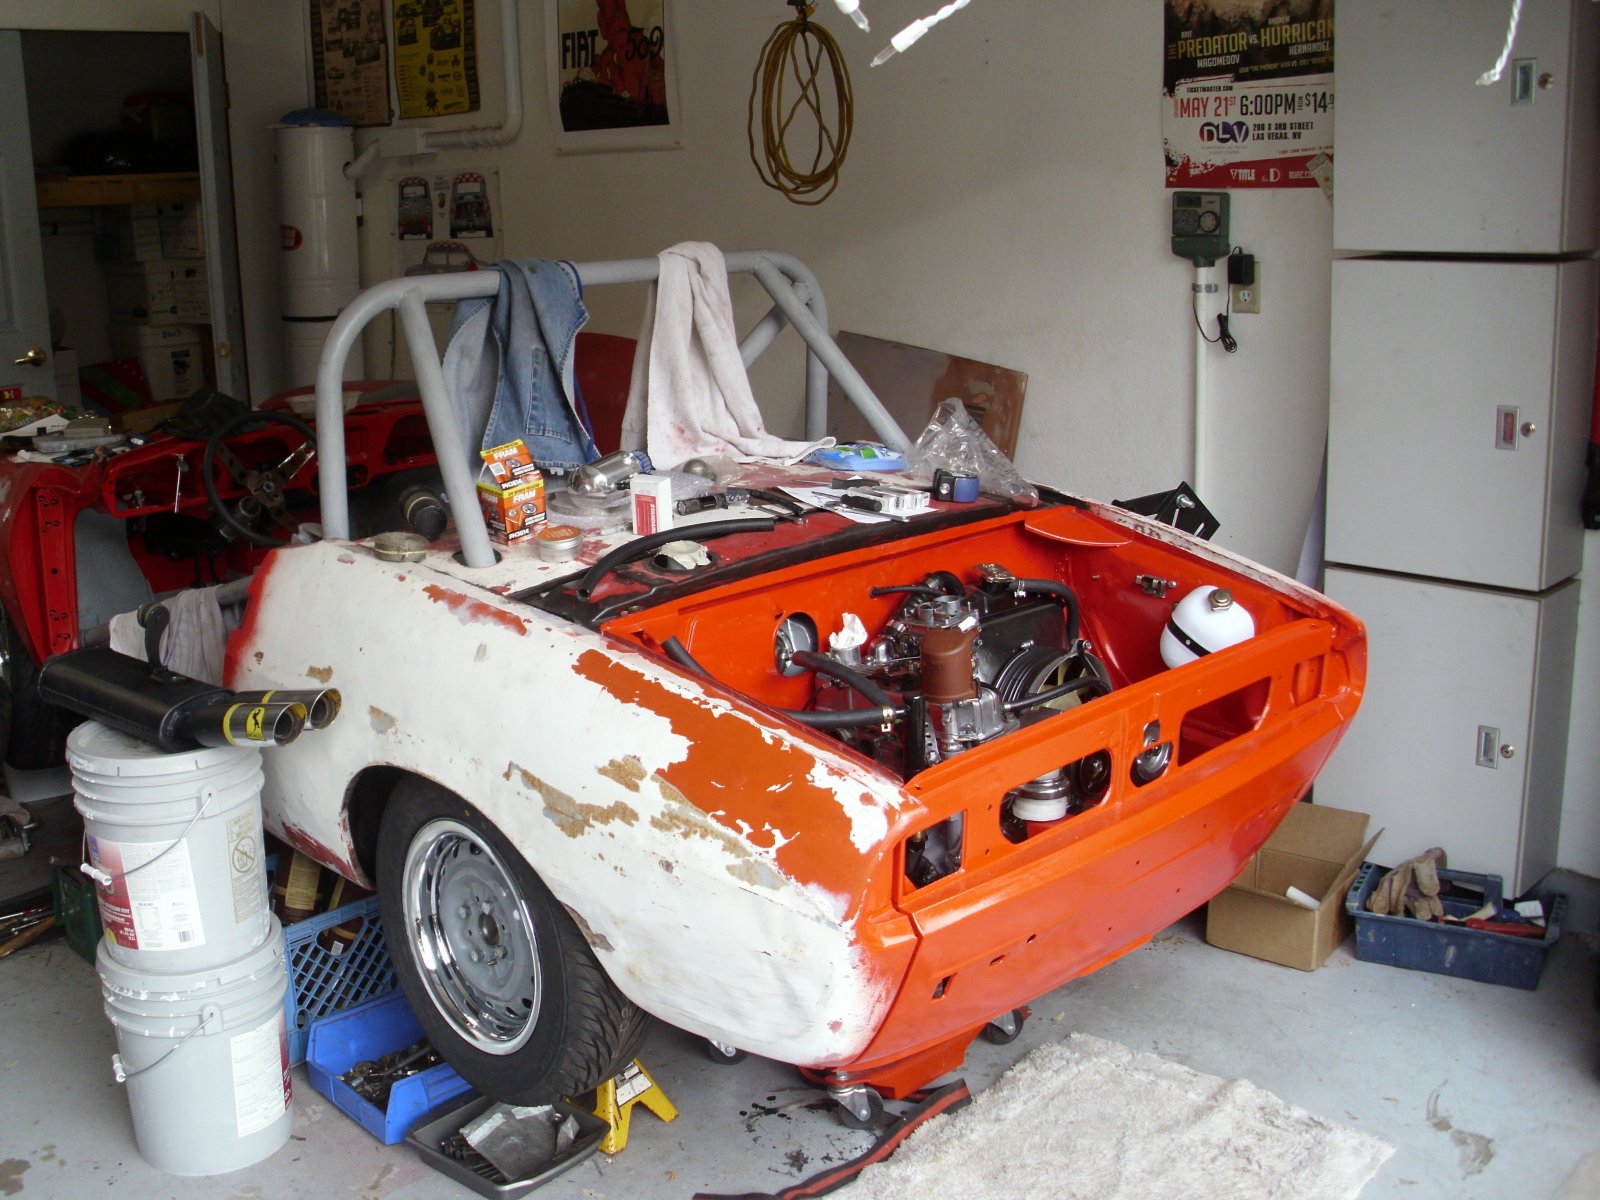 1967 Fiat 850 Spider restoration - Show and Tell | XWeb Forums v3